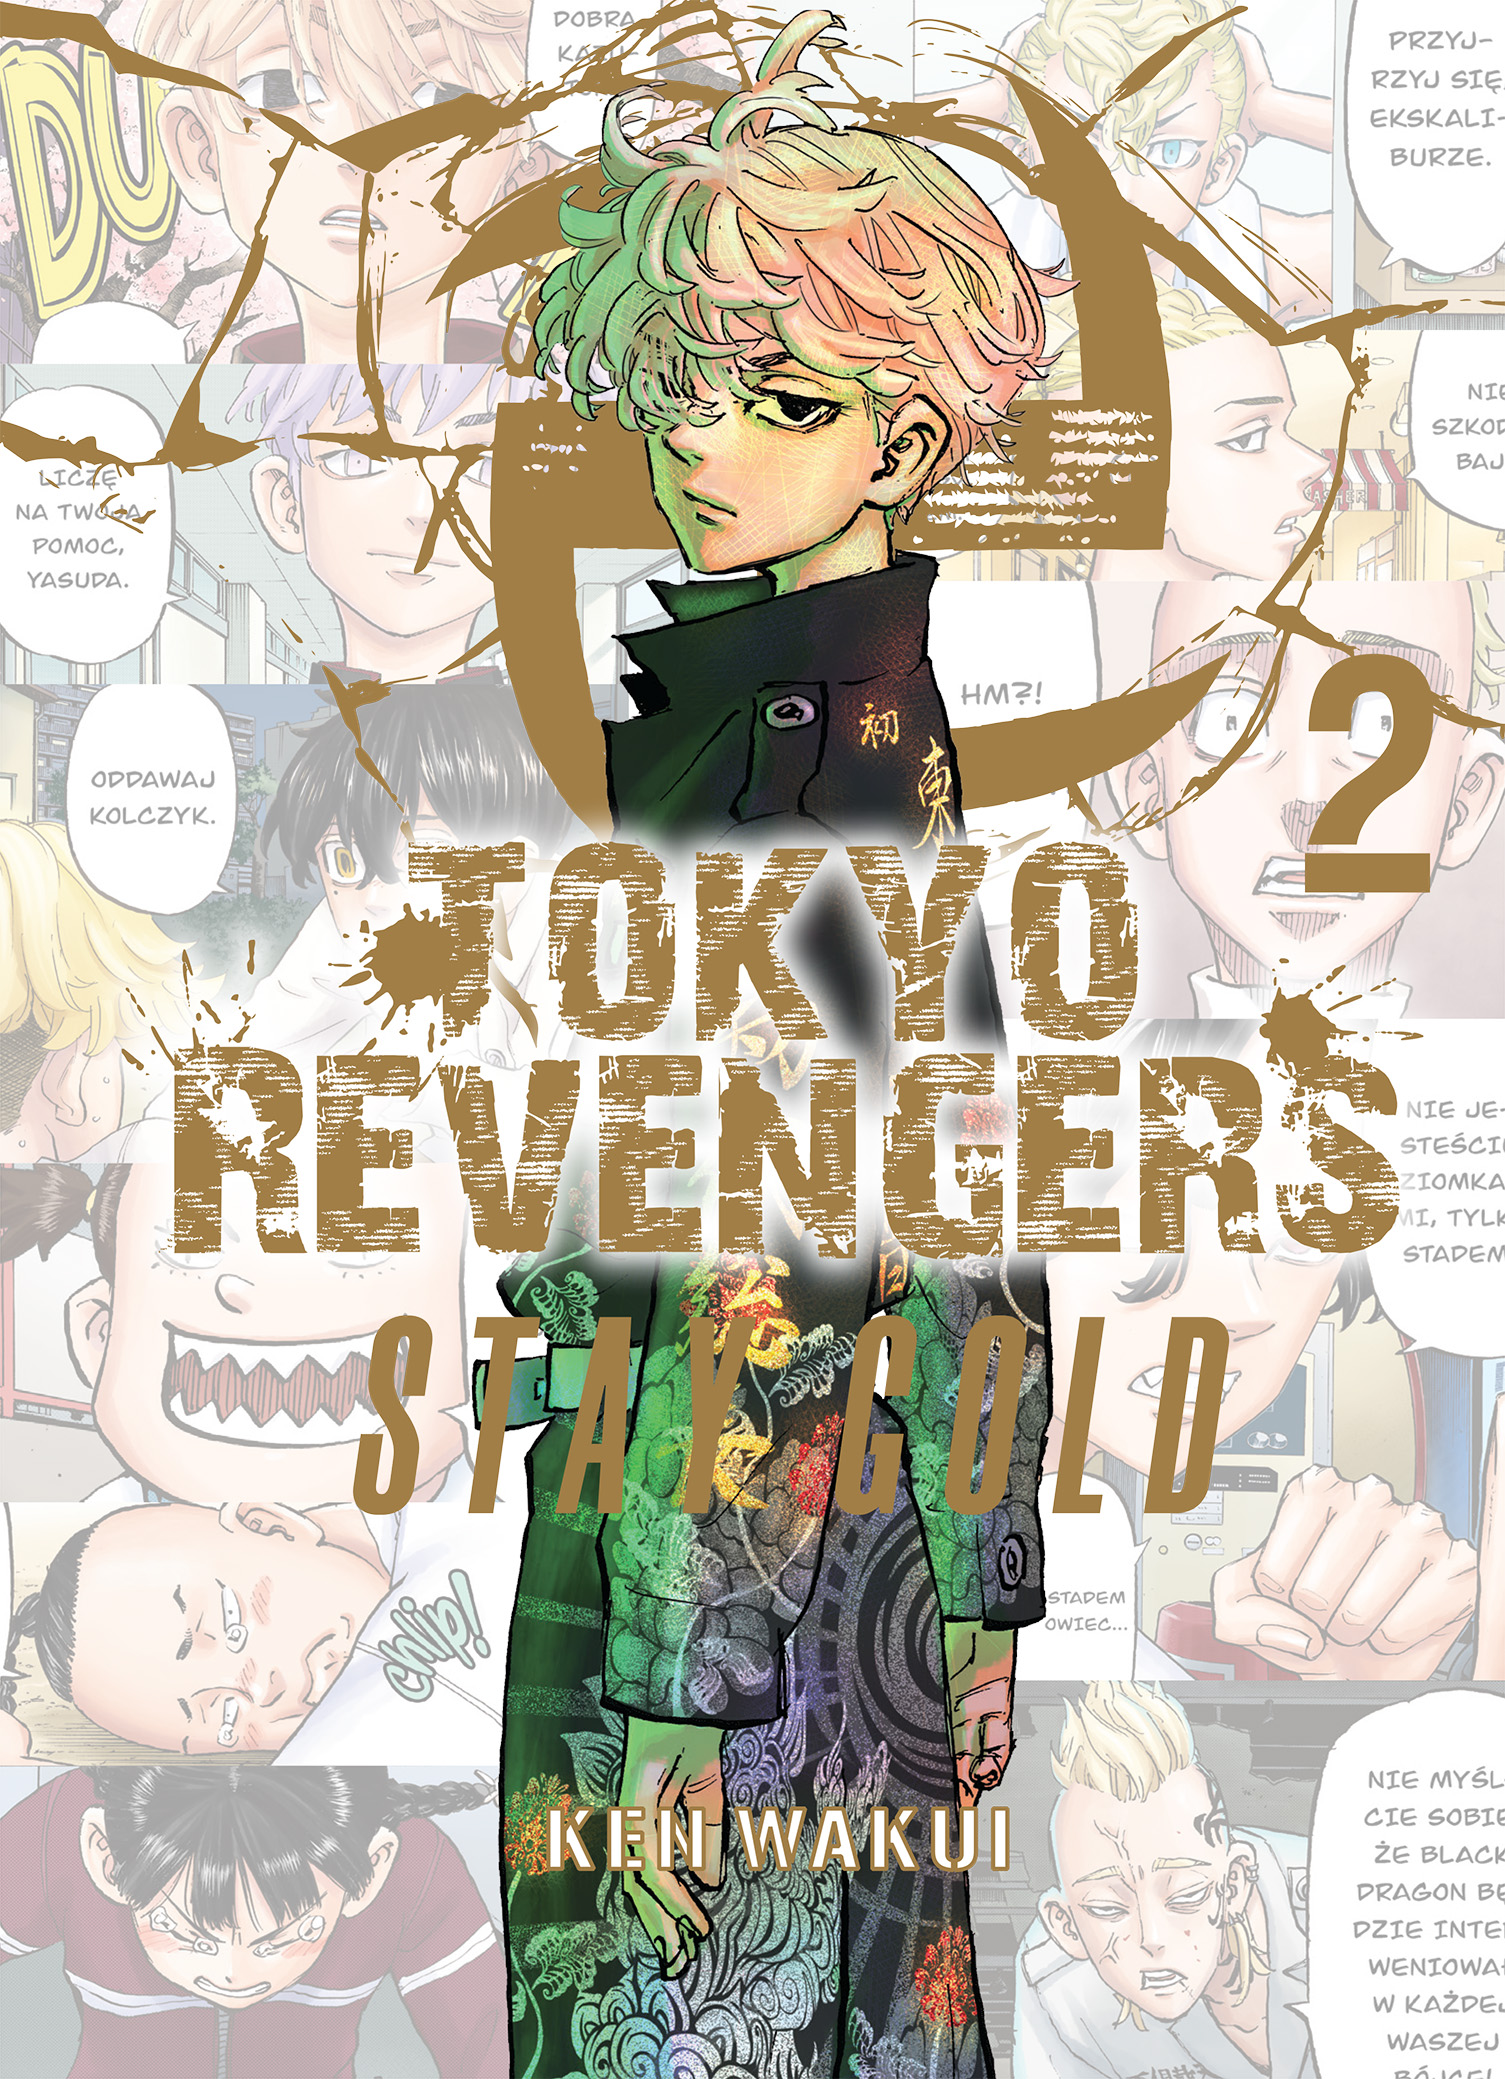 Tokyo Revengers - So young+Stay gold